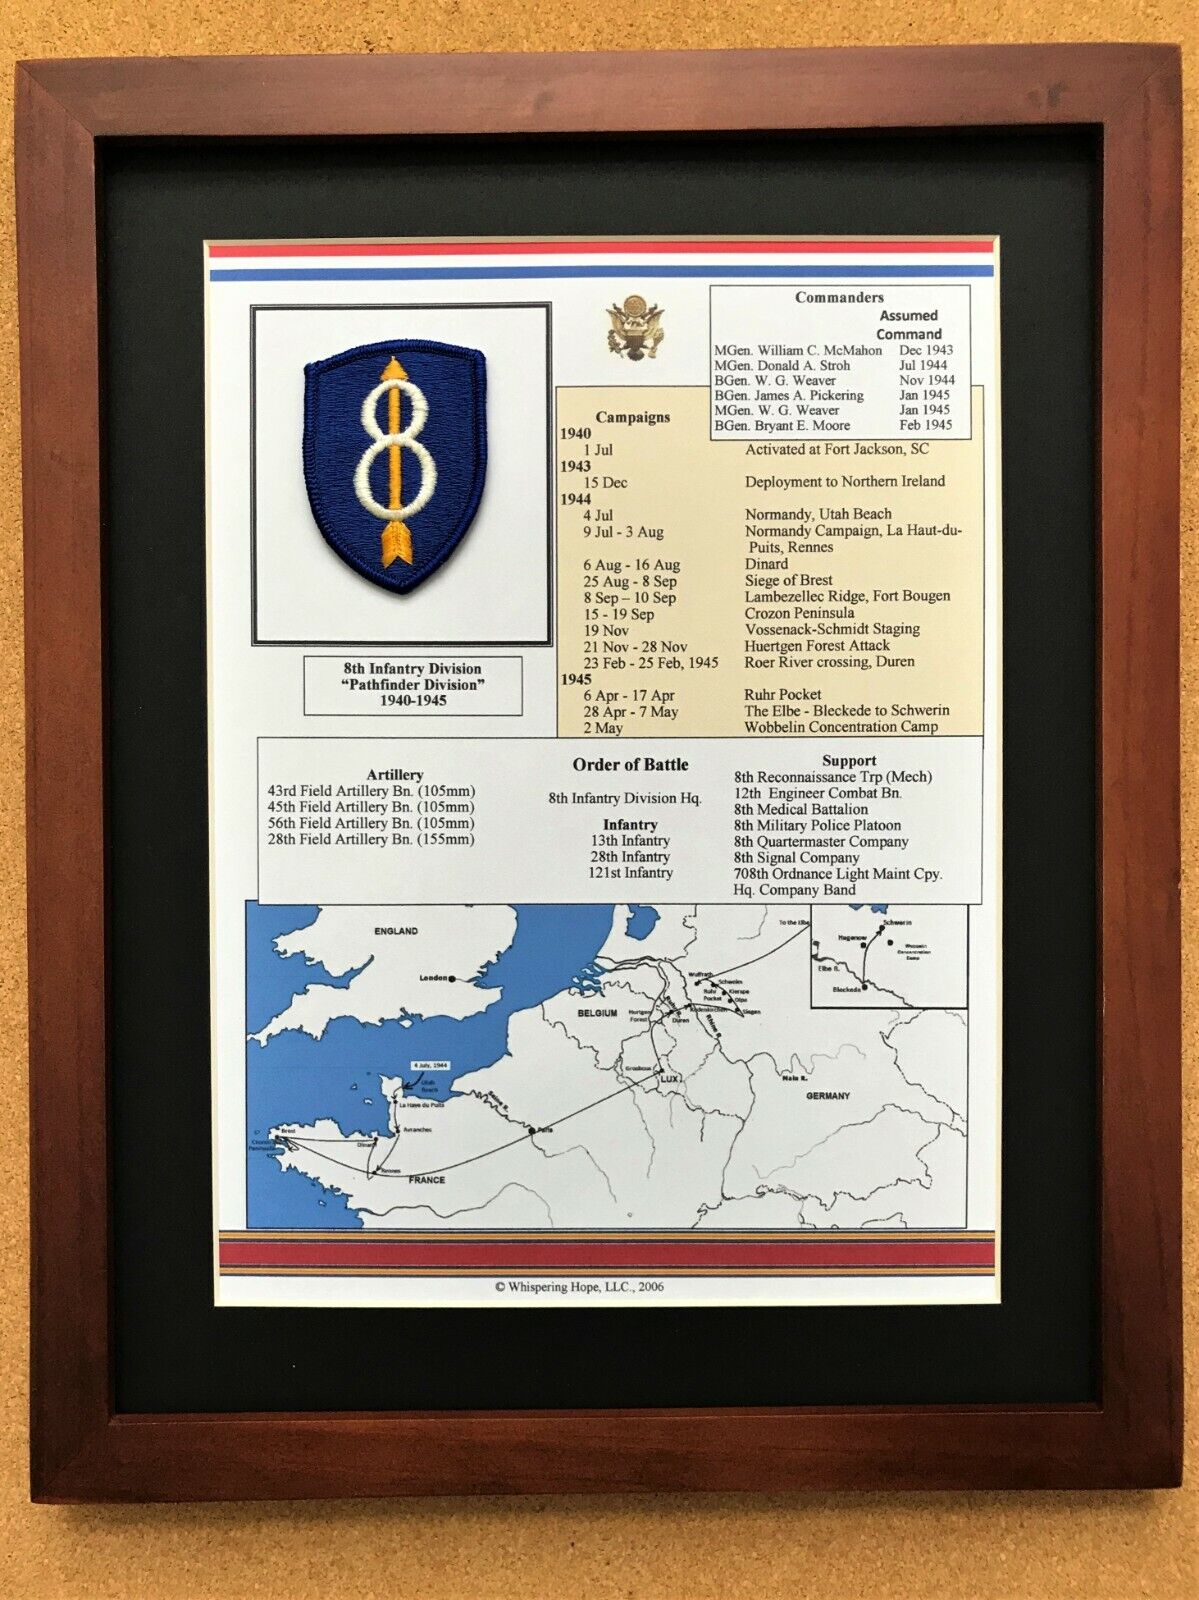 8th Infantry Division Insignia and History in World War II